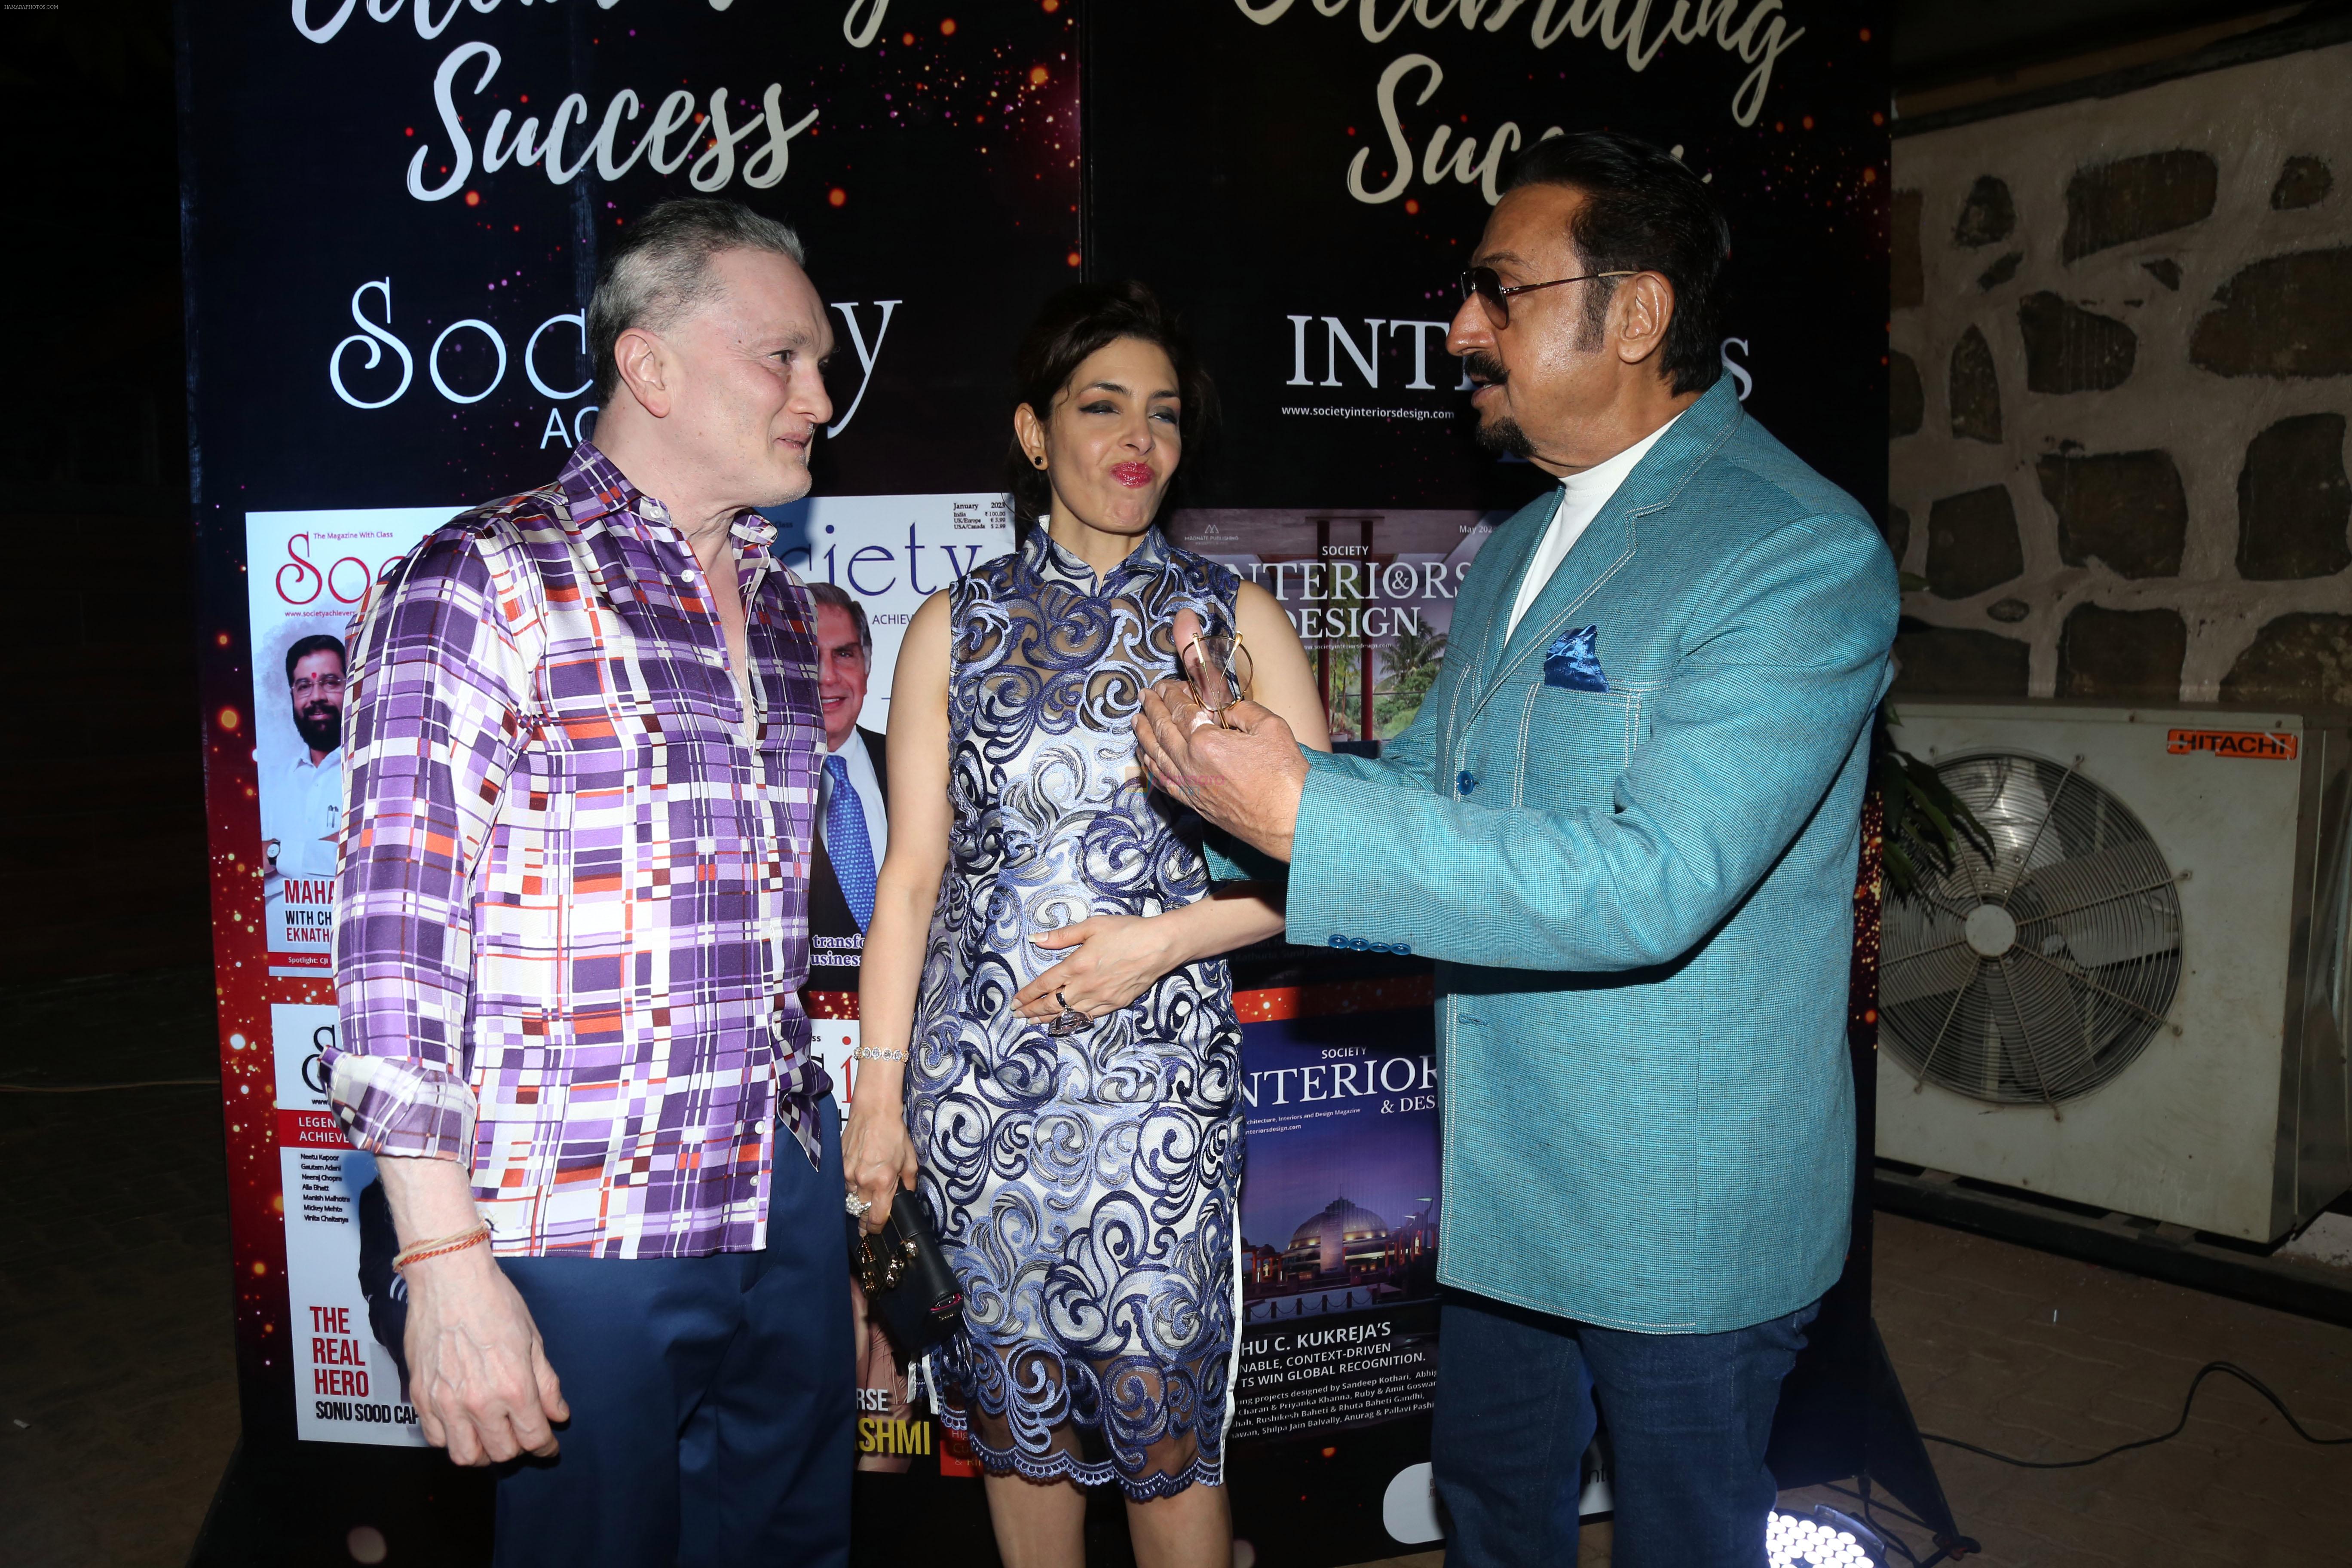 Gautam Singhania with wife Nawaz Modi Singhania and Gulshan Grover at the ReOpening of Keibaa X All Saints and Celebration of Society Achievers and Society Interiors and Design Magazine